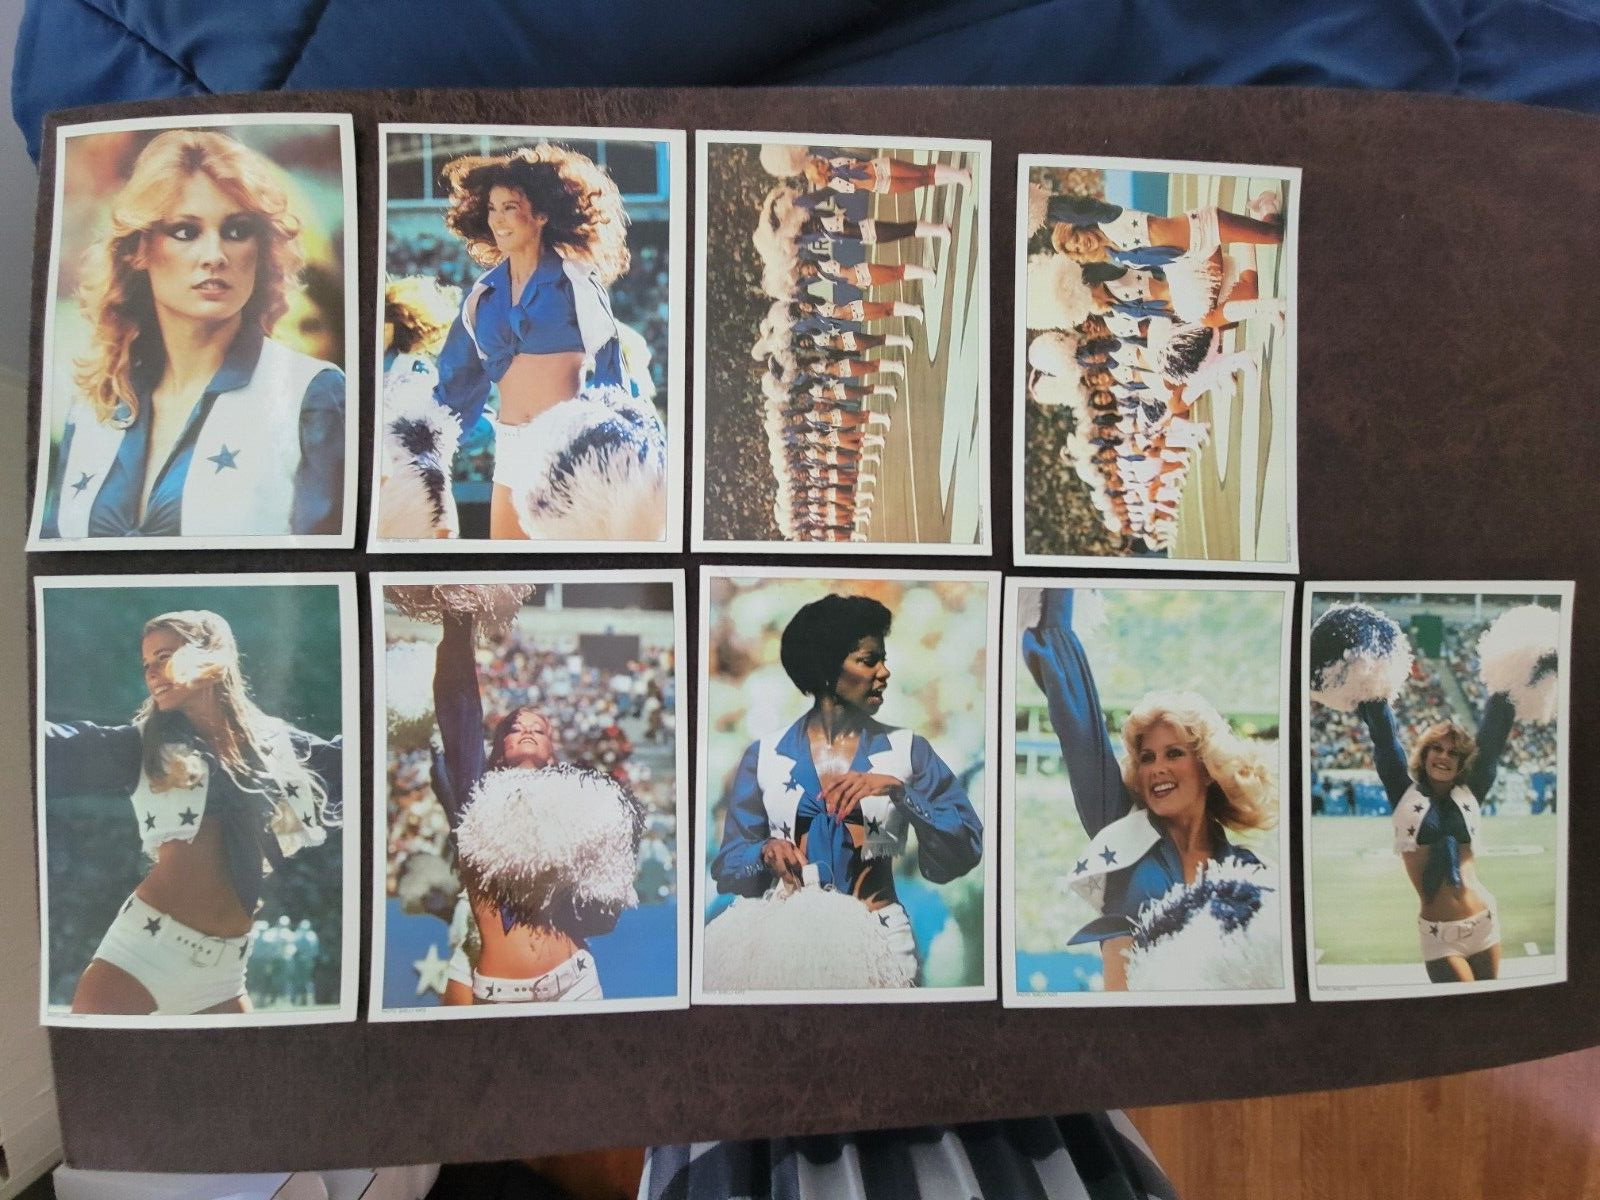 1981 Dallas Cowboy Cheerleaders 30 Card Complete Set Missing Cards 5 and 12